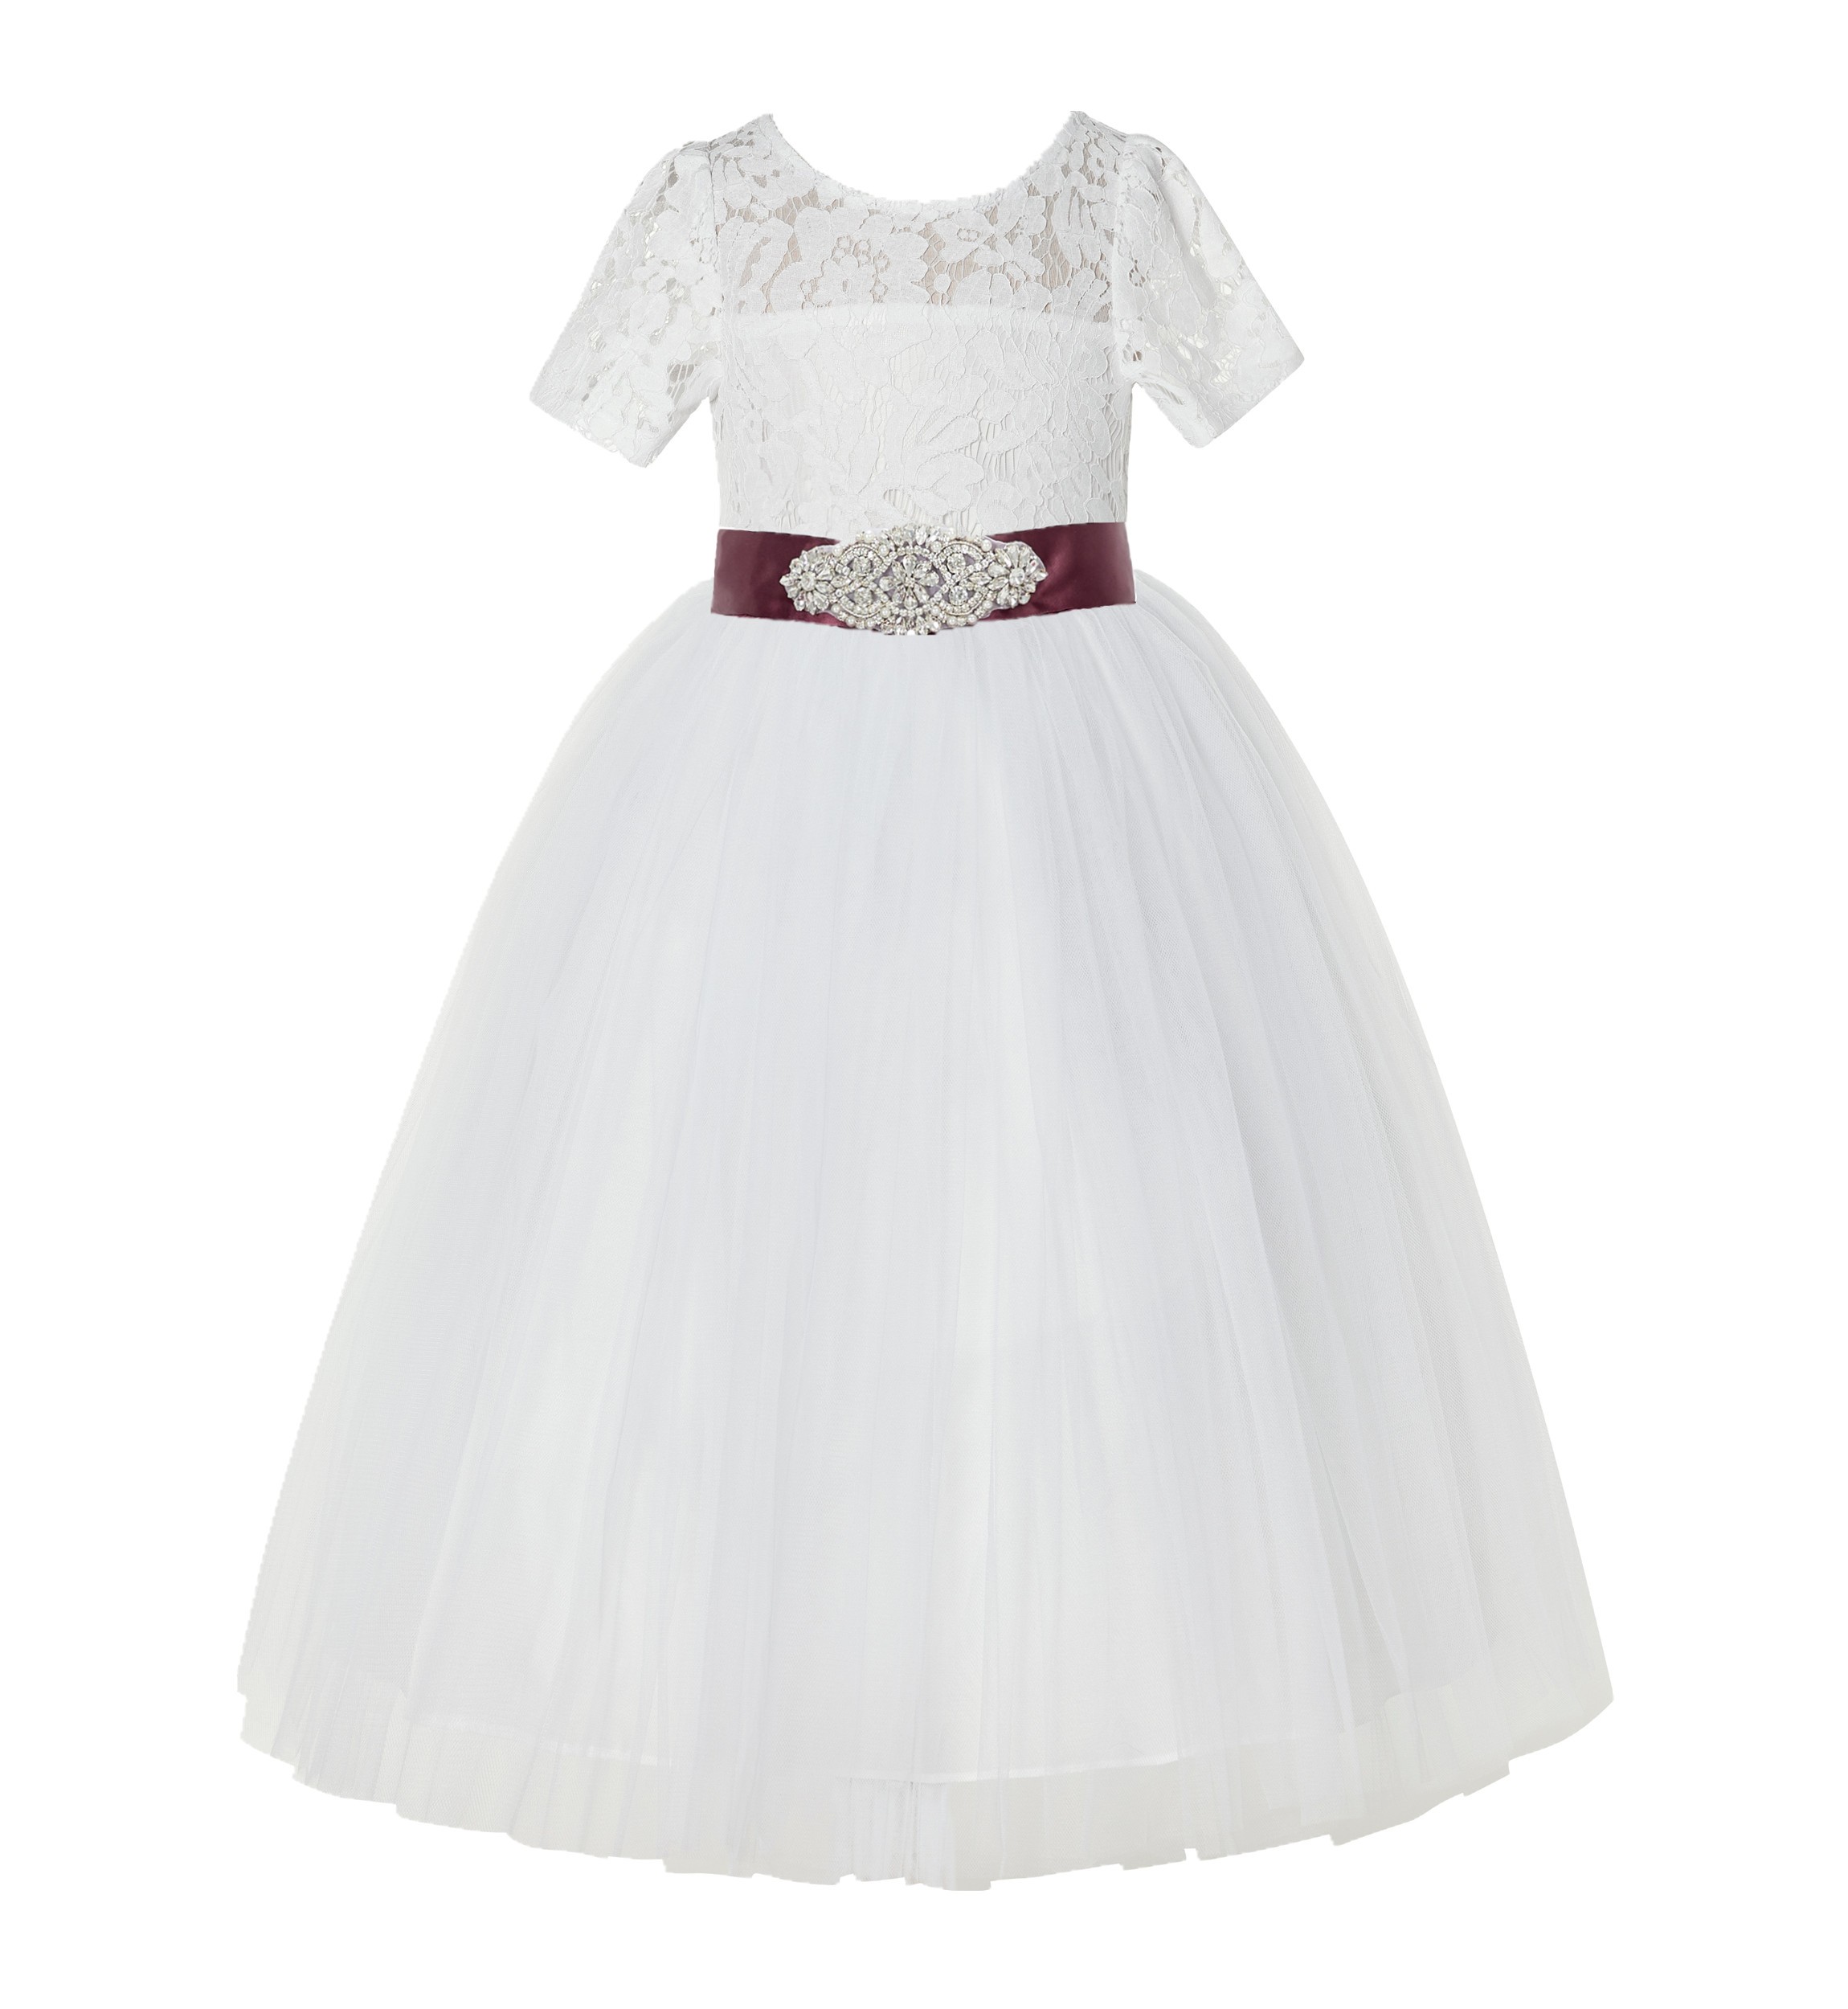 Ivory / Burgundy Floral Lace Flower Girl Dress Pageant Dress LG2